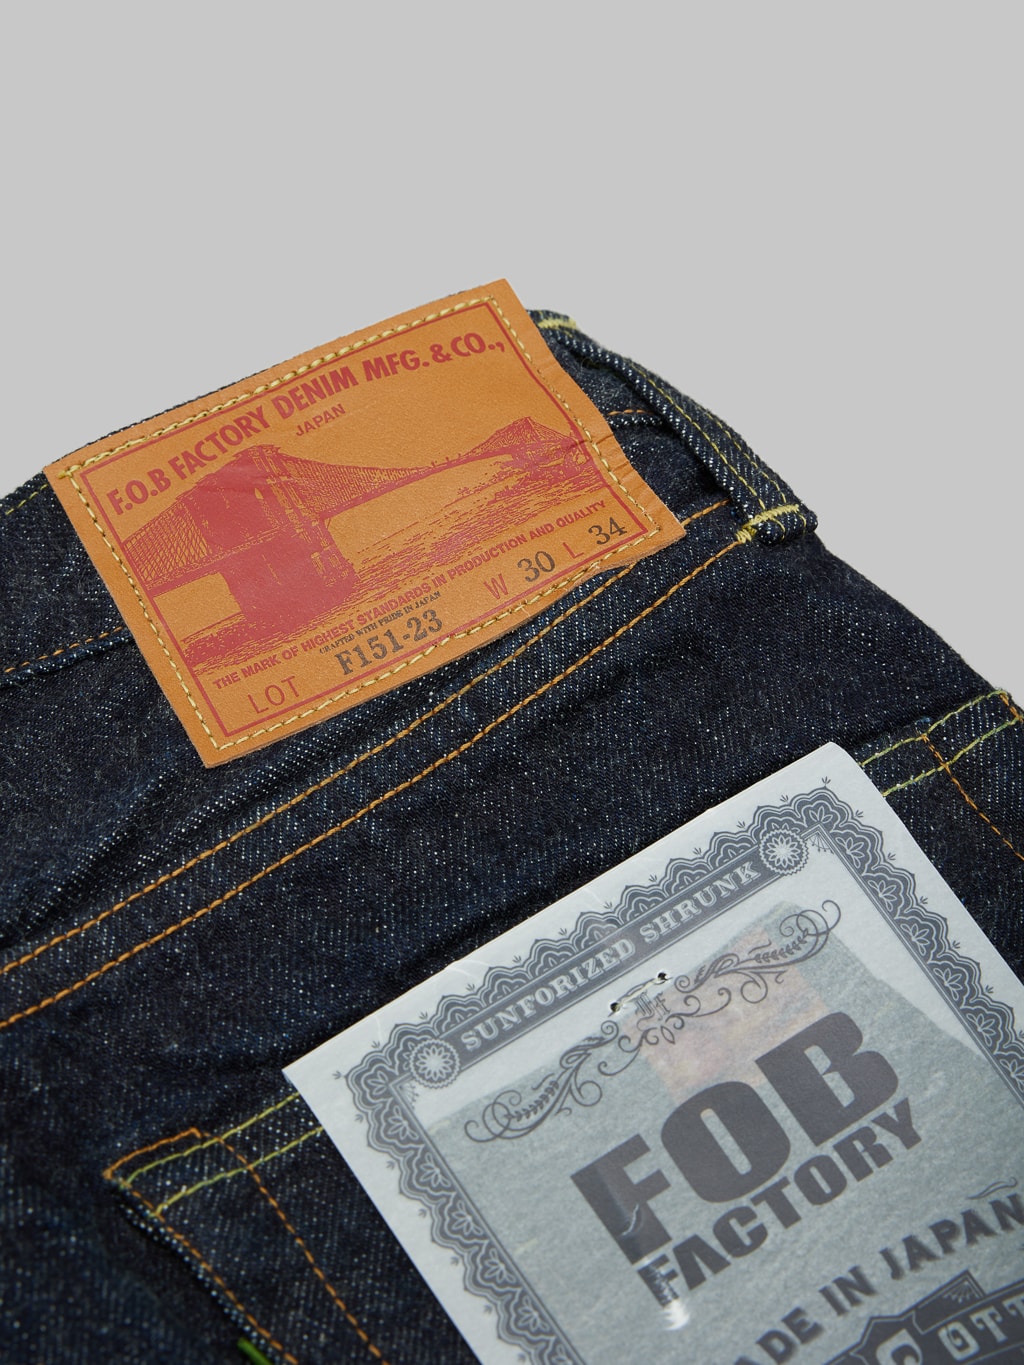 Fob factory slim straight denim jeans brand leather patch